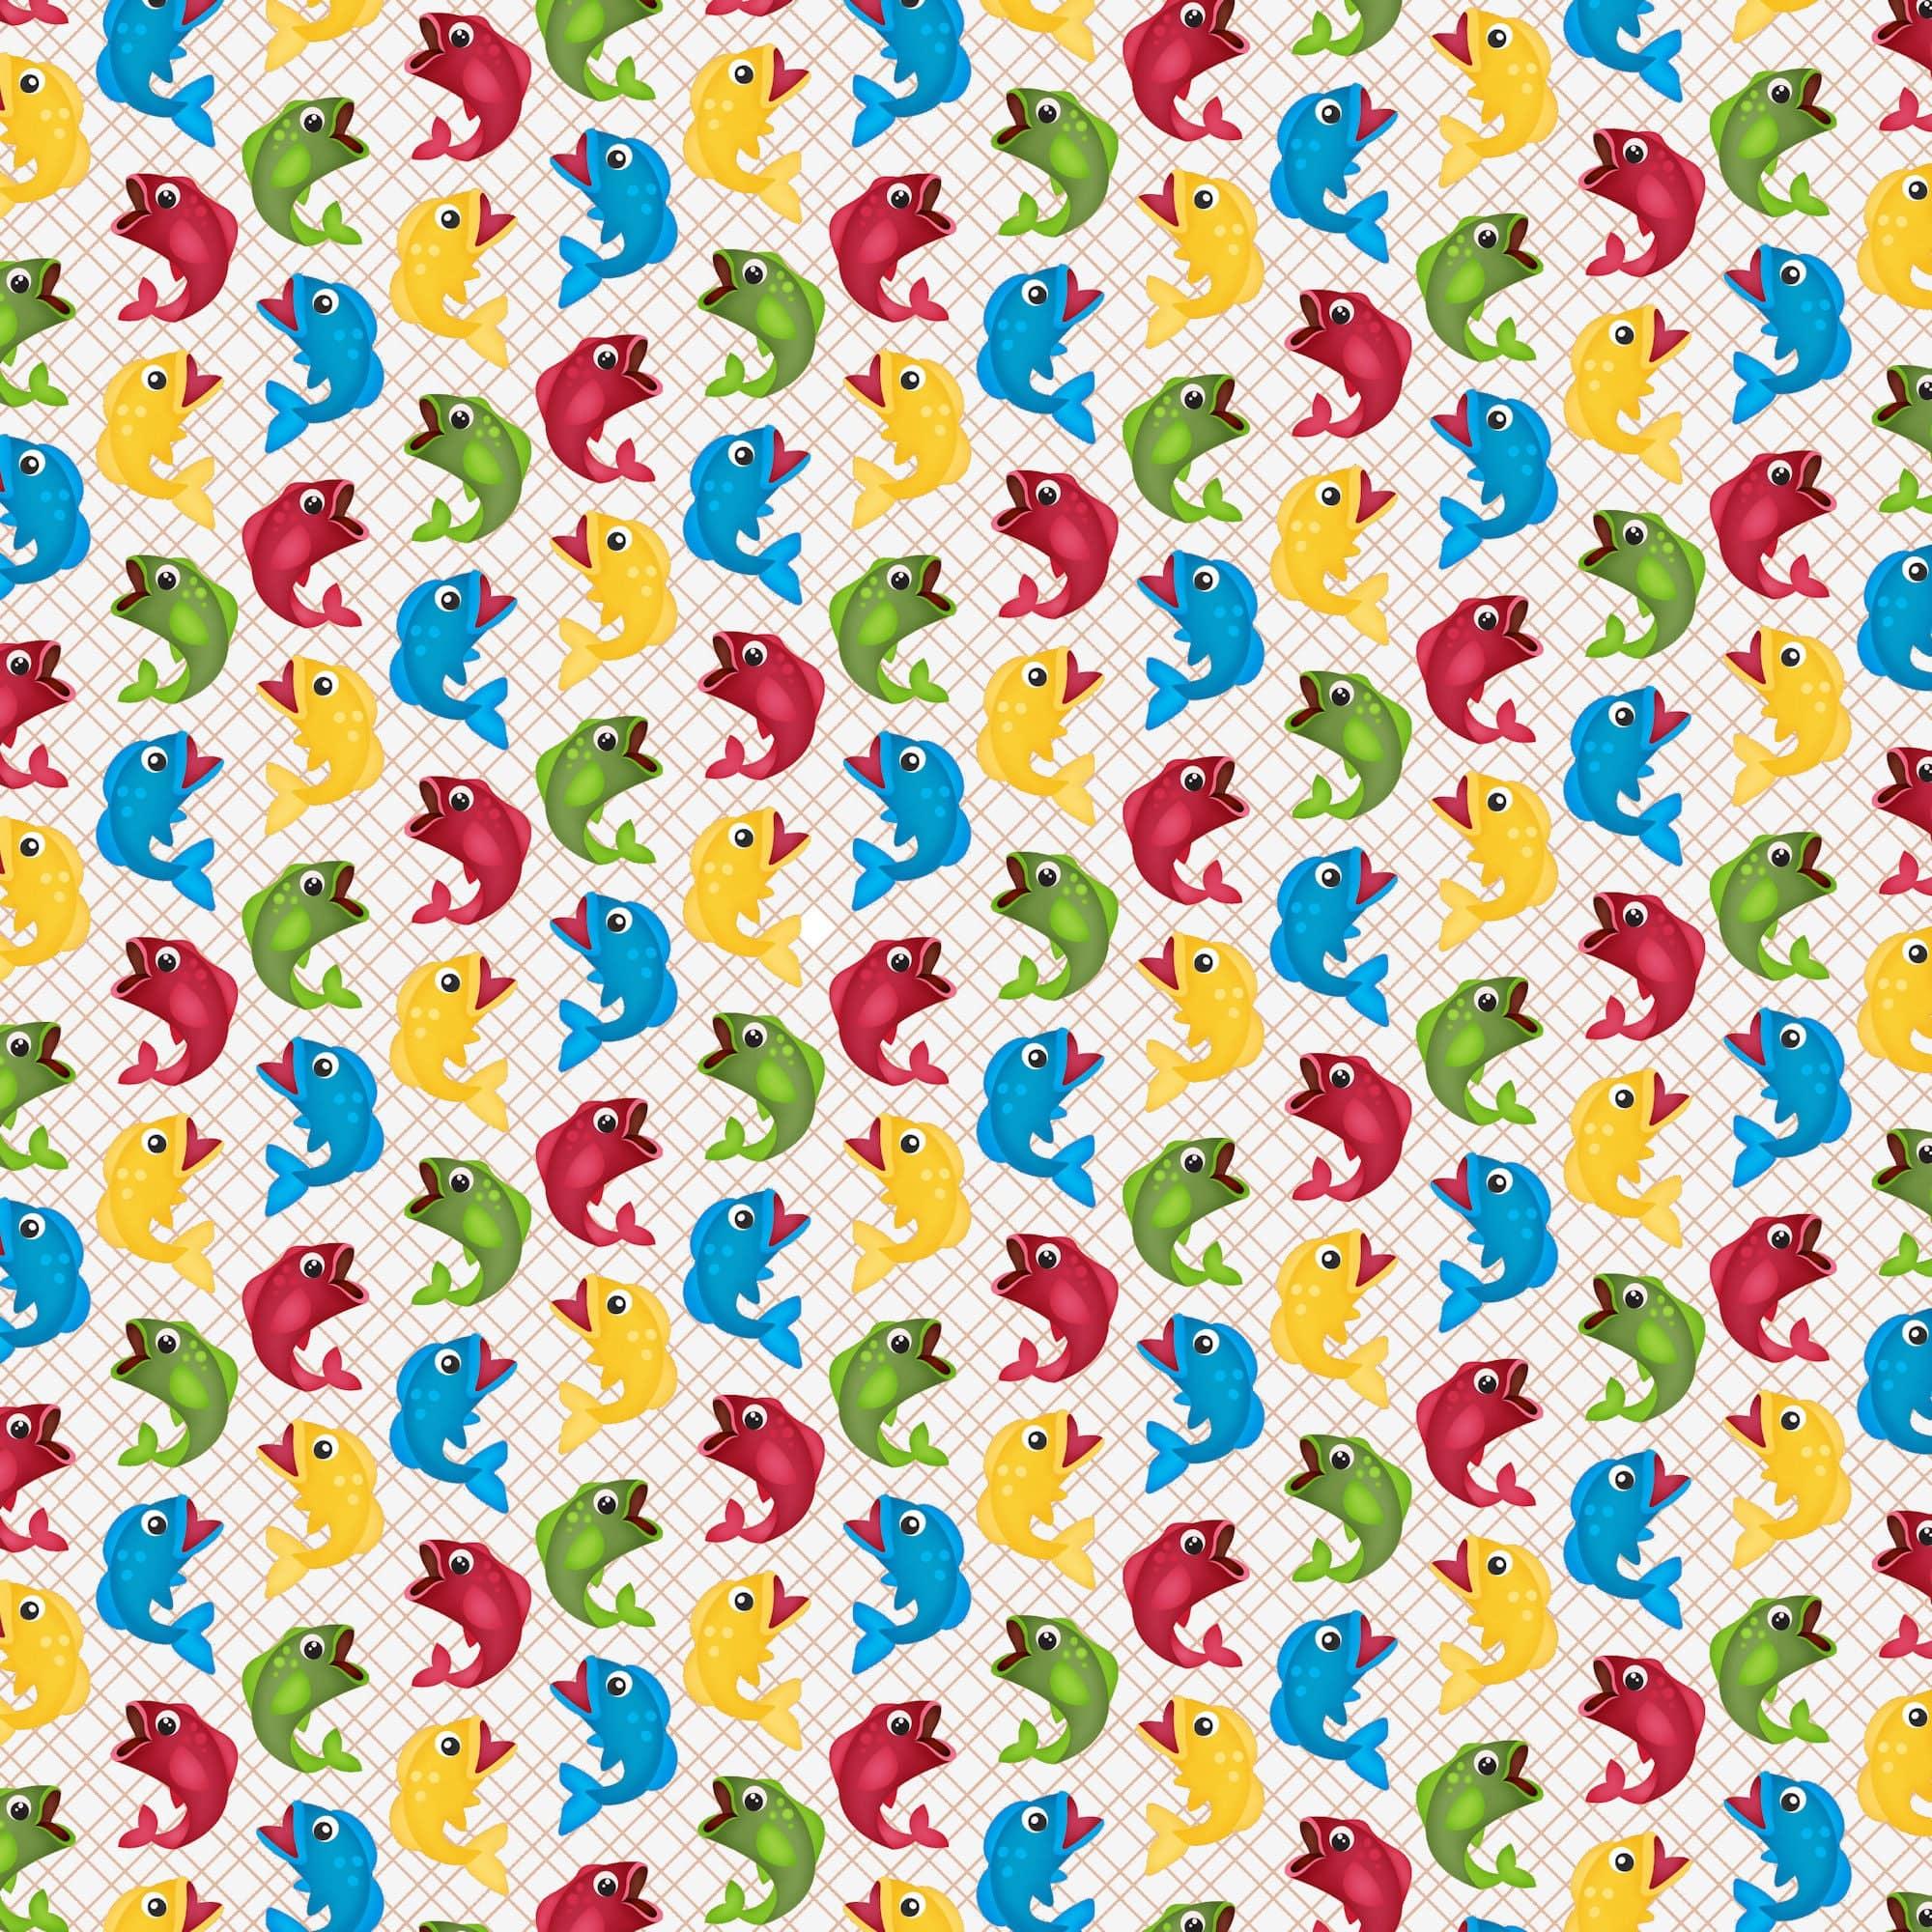 Hook, Line & Sinker Collection Here Fishy, Fishy 12 x 12 Double-Sided Scrapbook Papers by SSC Designs - Scrapbook Supply Companies